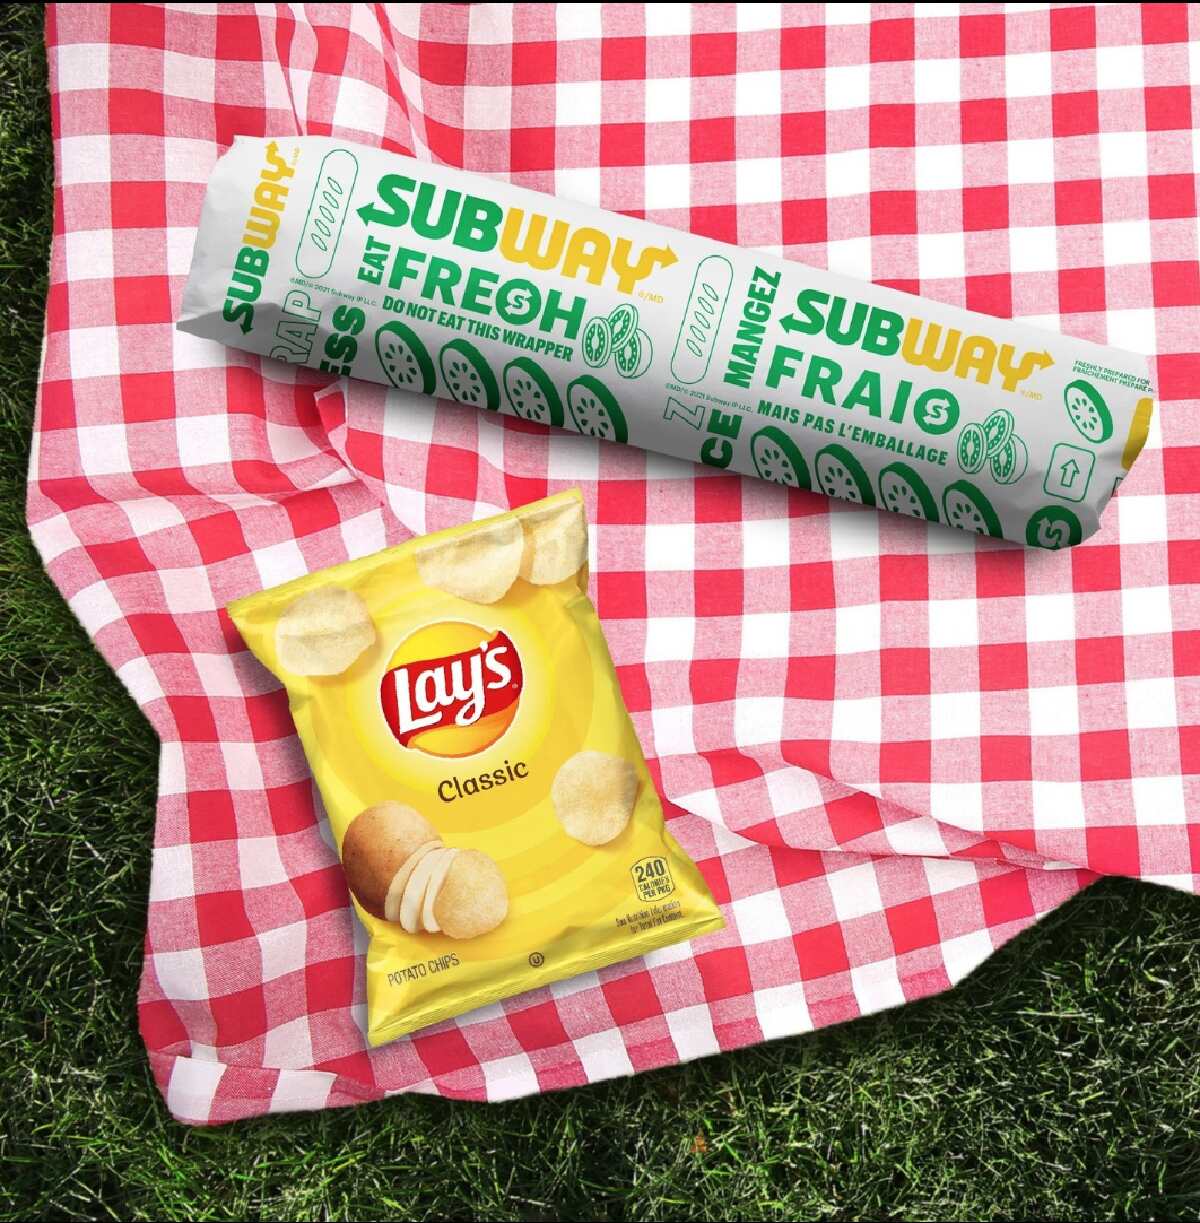 A wrapped Subway sandwich and a bag of Lay's potato chips laid out on red gingham blanket  on the grass. 